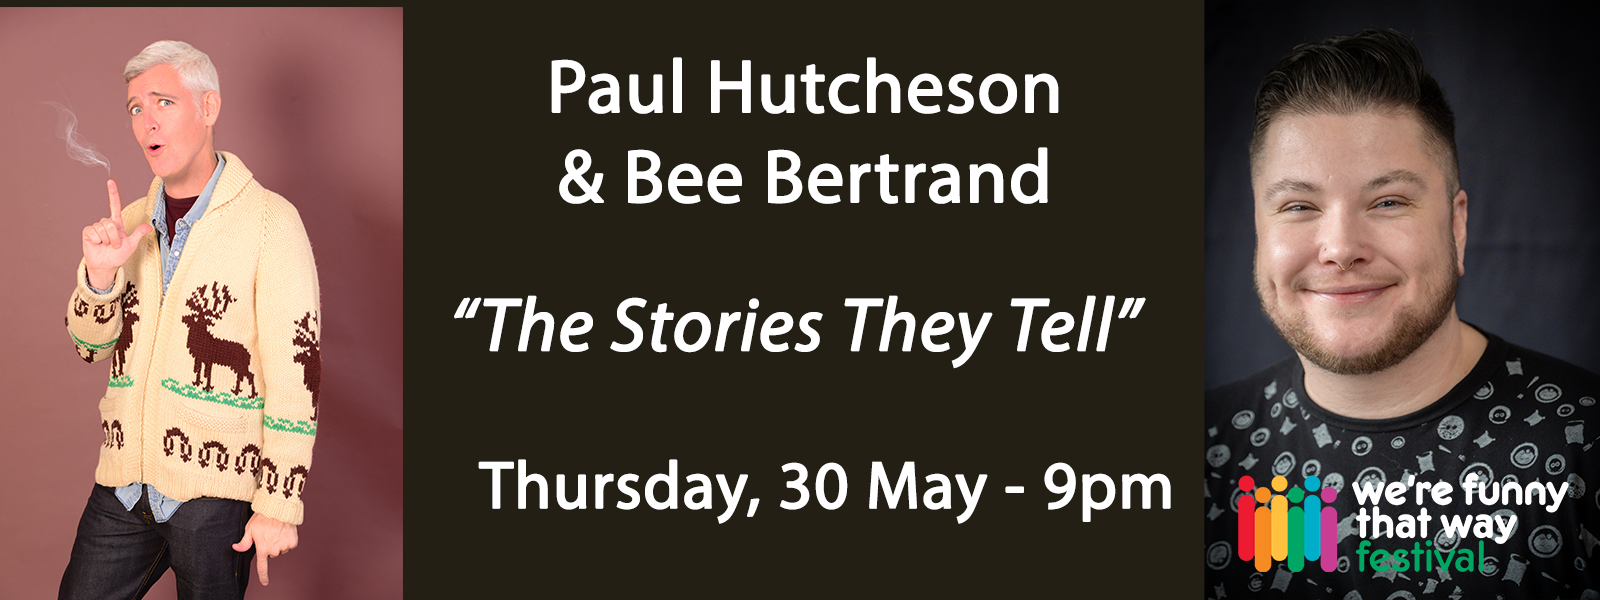 The Stories They Tell featuring Bee Bertrand and Paul Hutcheson show poster